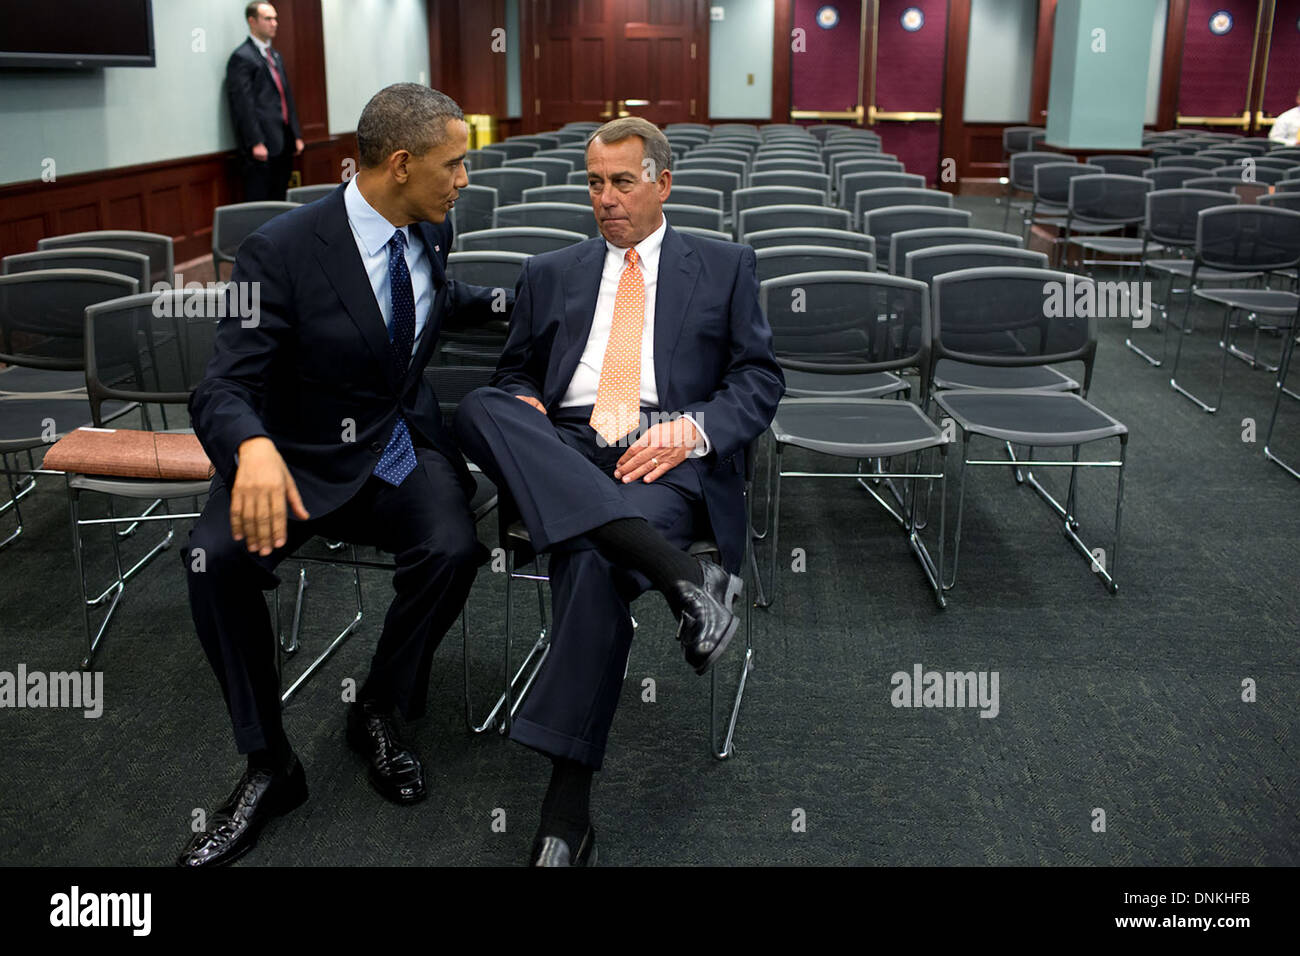 US President Barack Obama talks with House Speaker John Boehner after participating in a Question and Answer session with the House Republican Conference at the U.S. Capitol March 13, 2013 in Washington, DC. Stock Photo